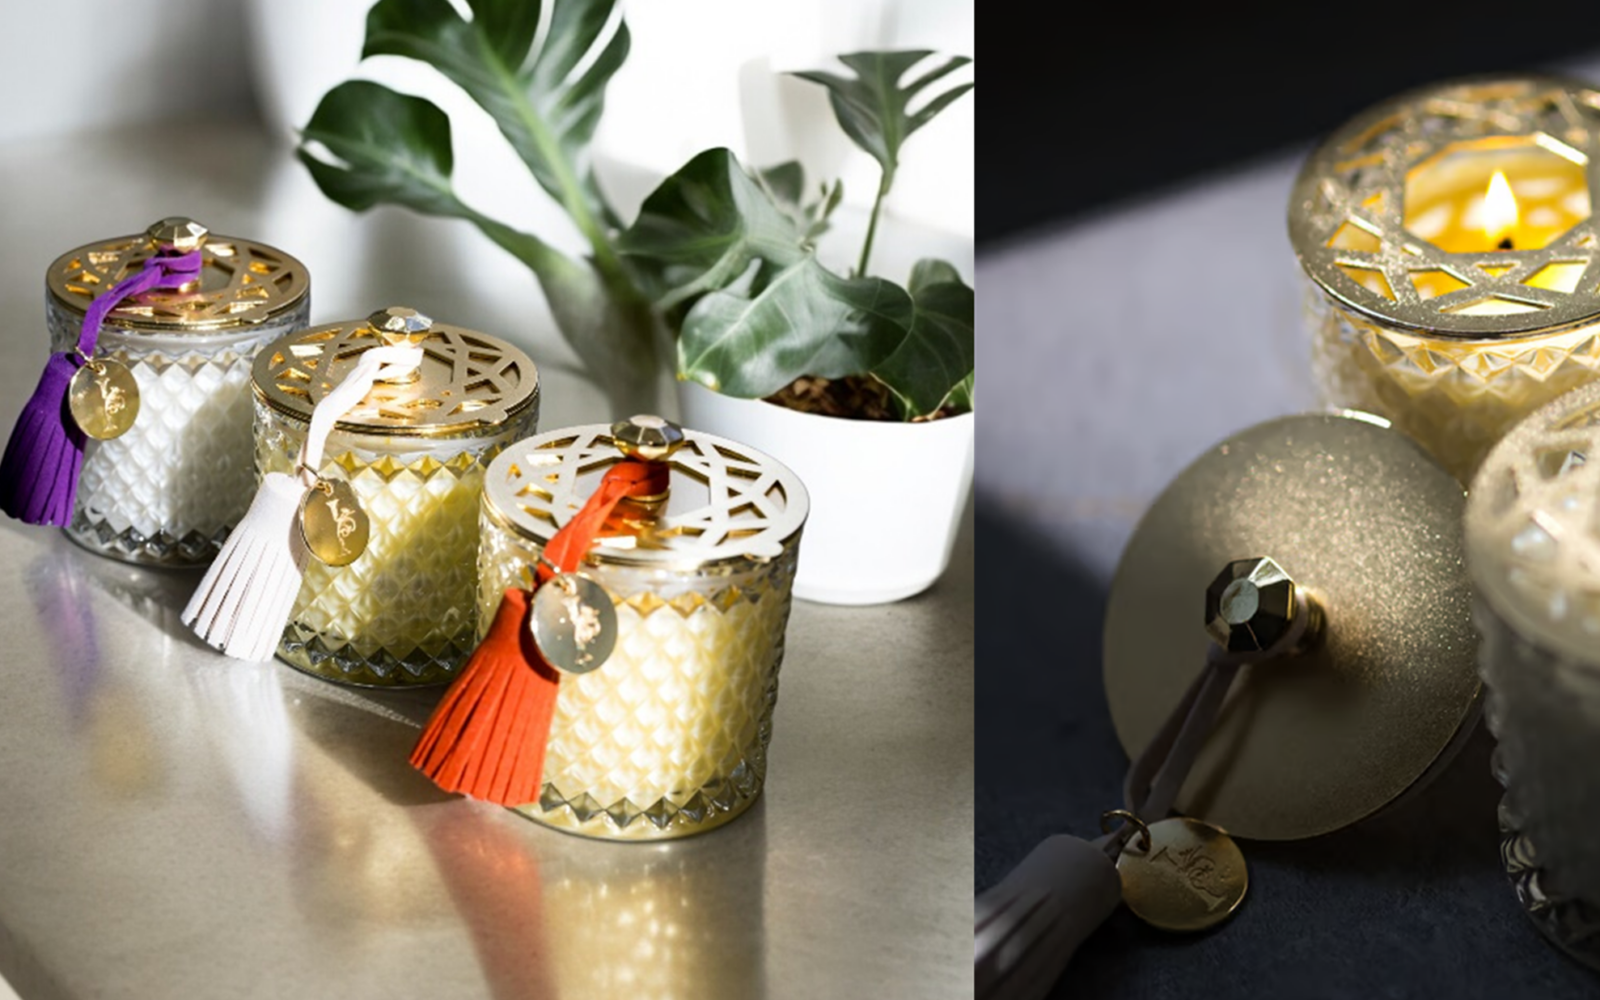 Indulge with Luxury Handmade Aroma Candles from LA, Crafted in Japan